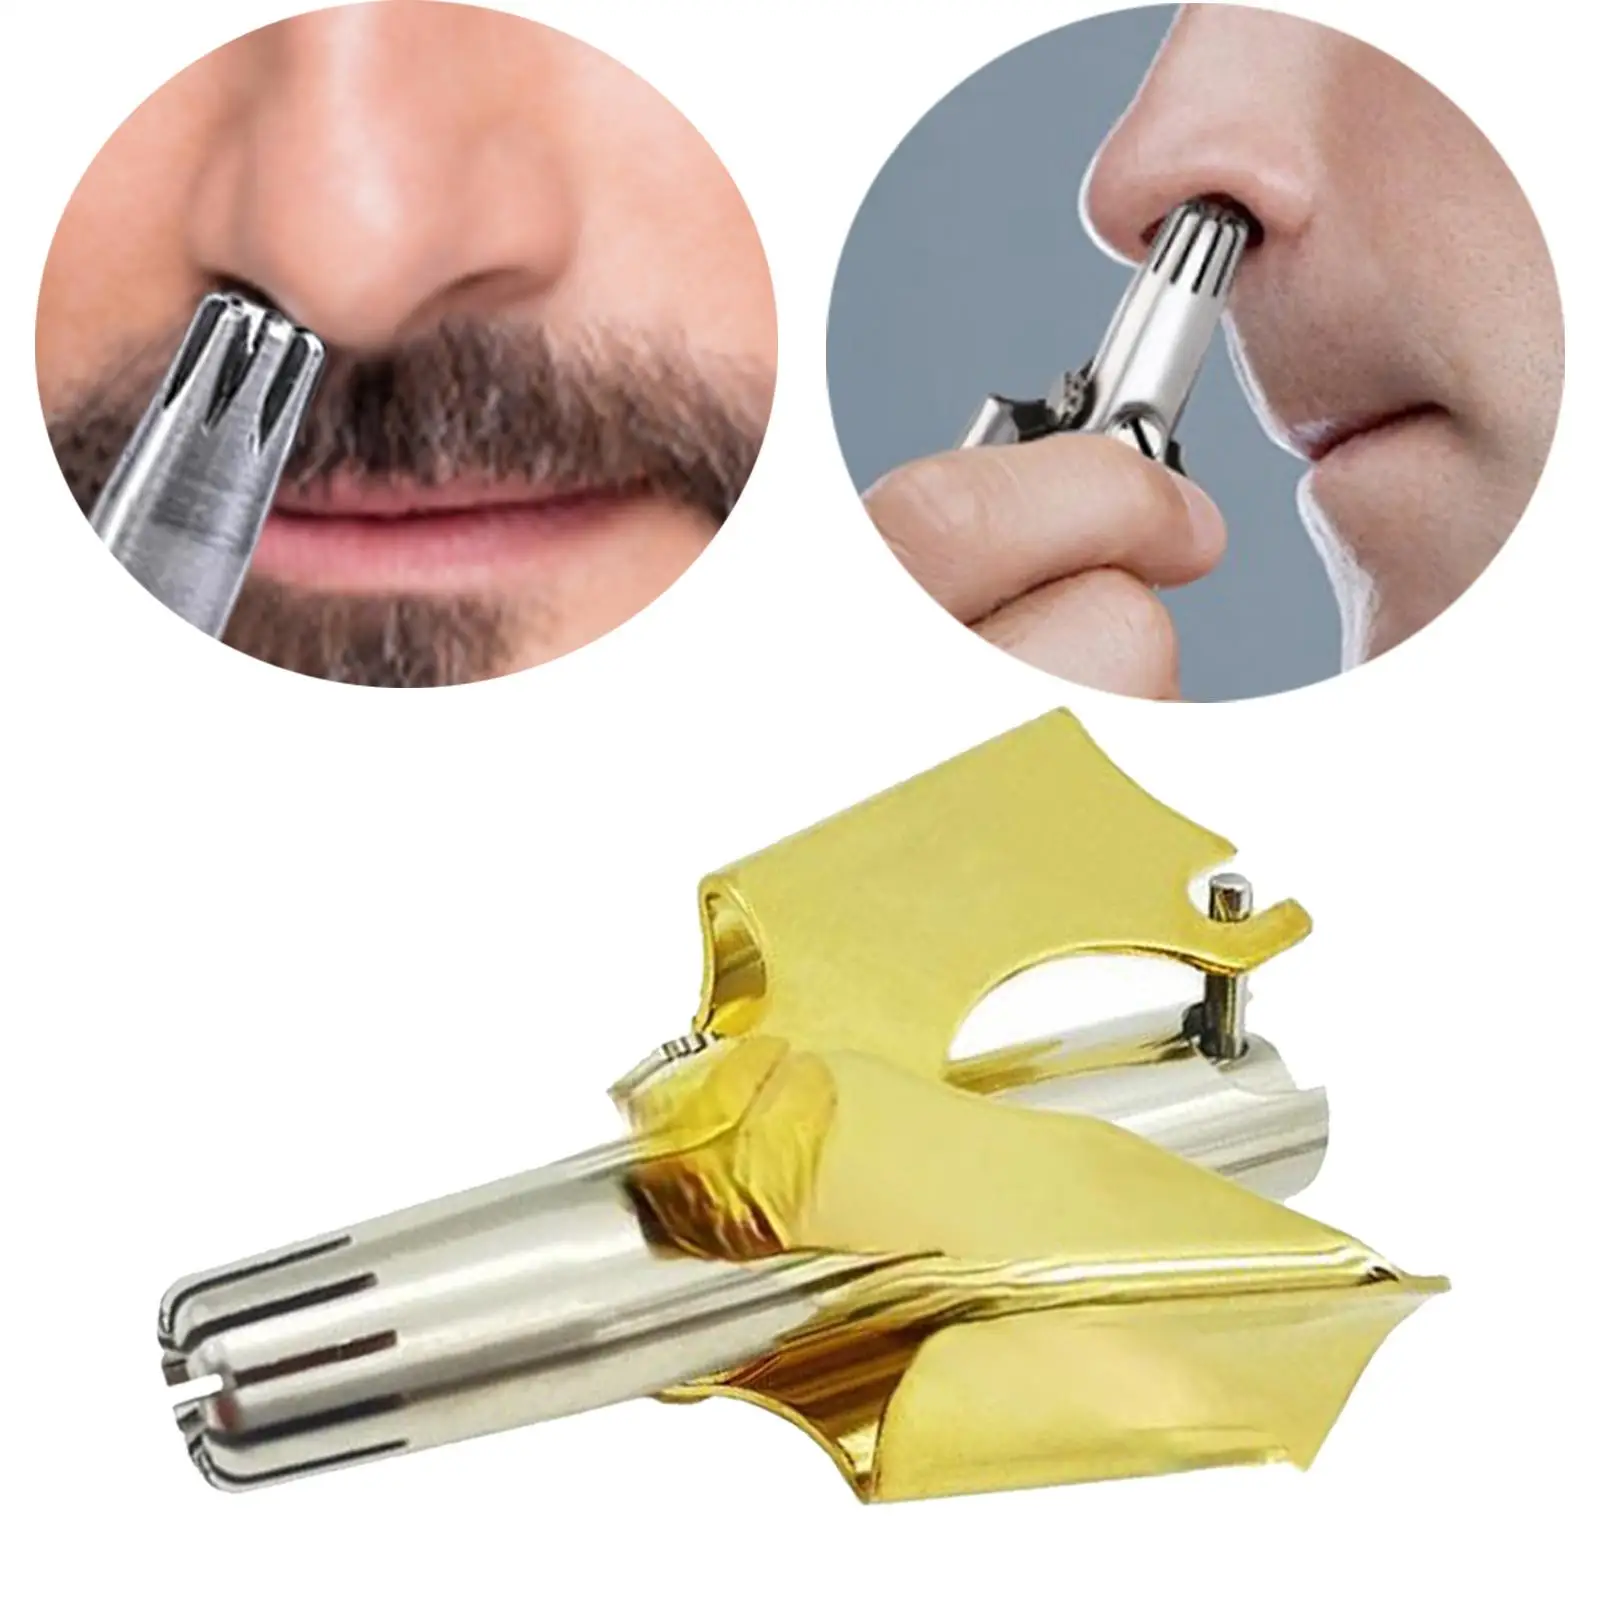 Portable Nose Ear Hair Trimmer Whole Body Washable Stainless Steel Mini Nose Razor Shaver Low Noise Gift for Men Ear Hair Cutter